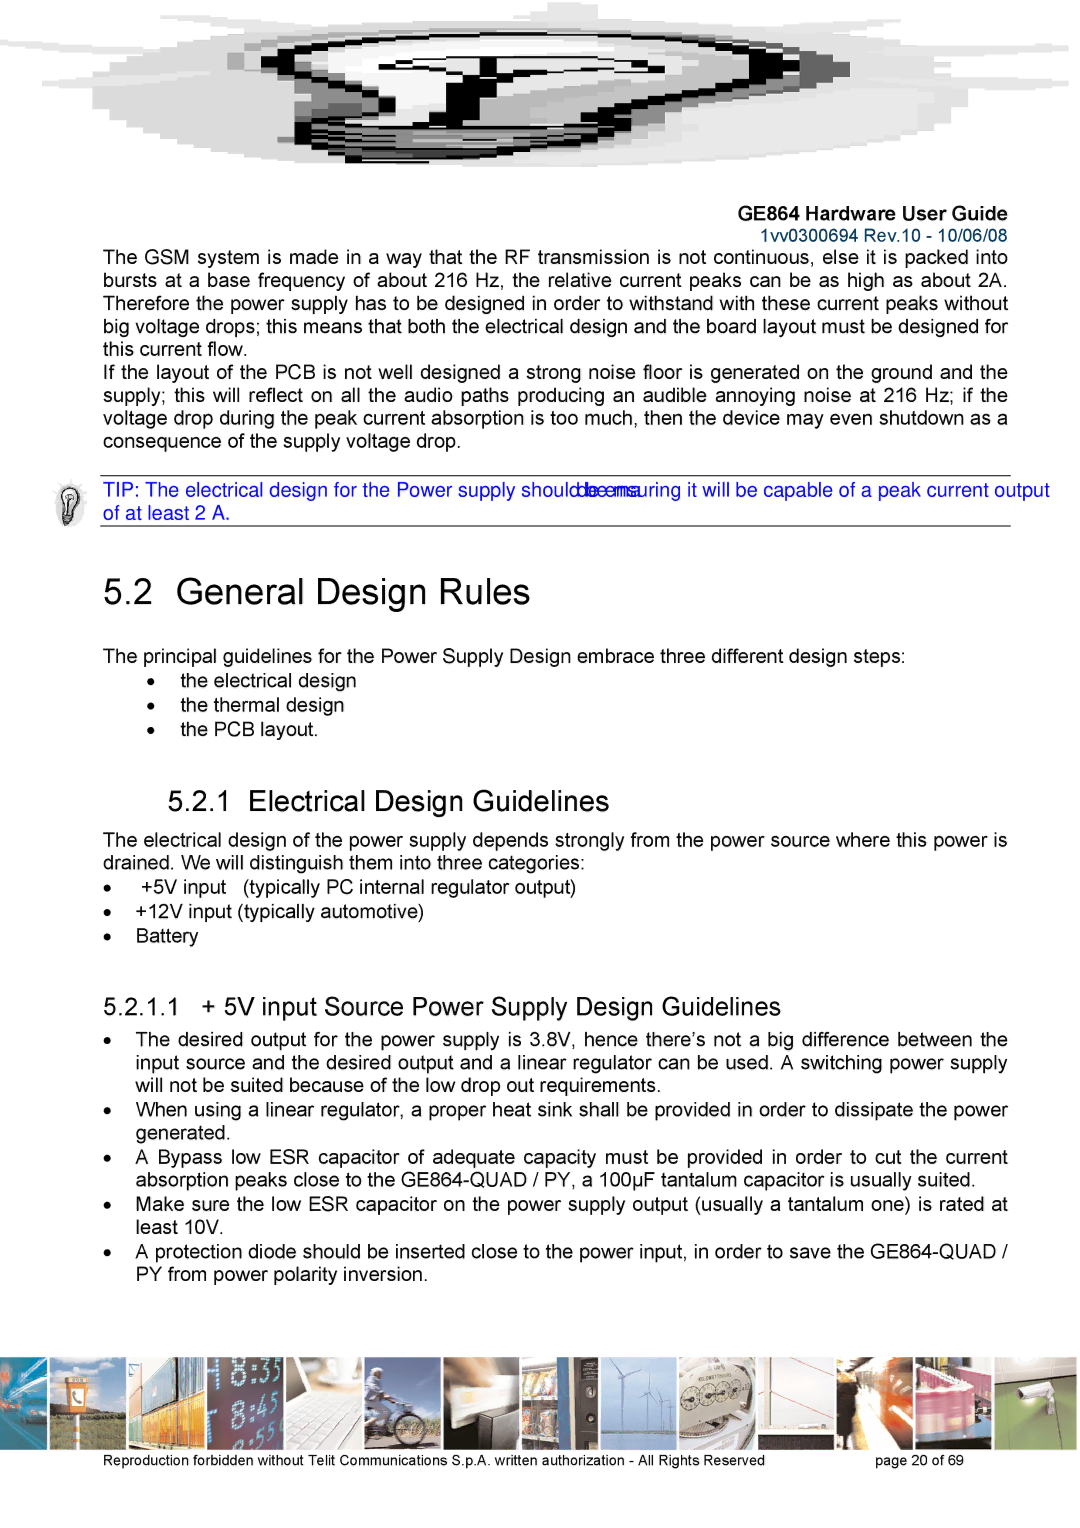 Telit Wireless Solutions GE864 manual General Design Rules, Electrical Design Guidelines 